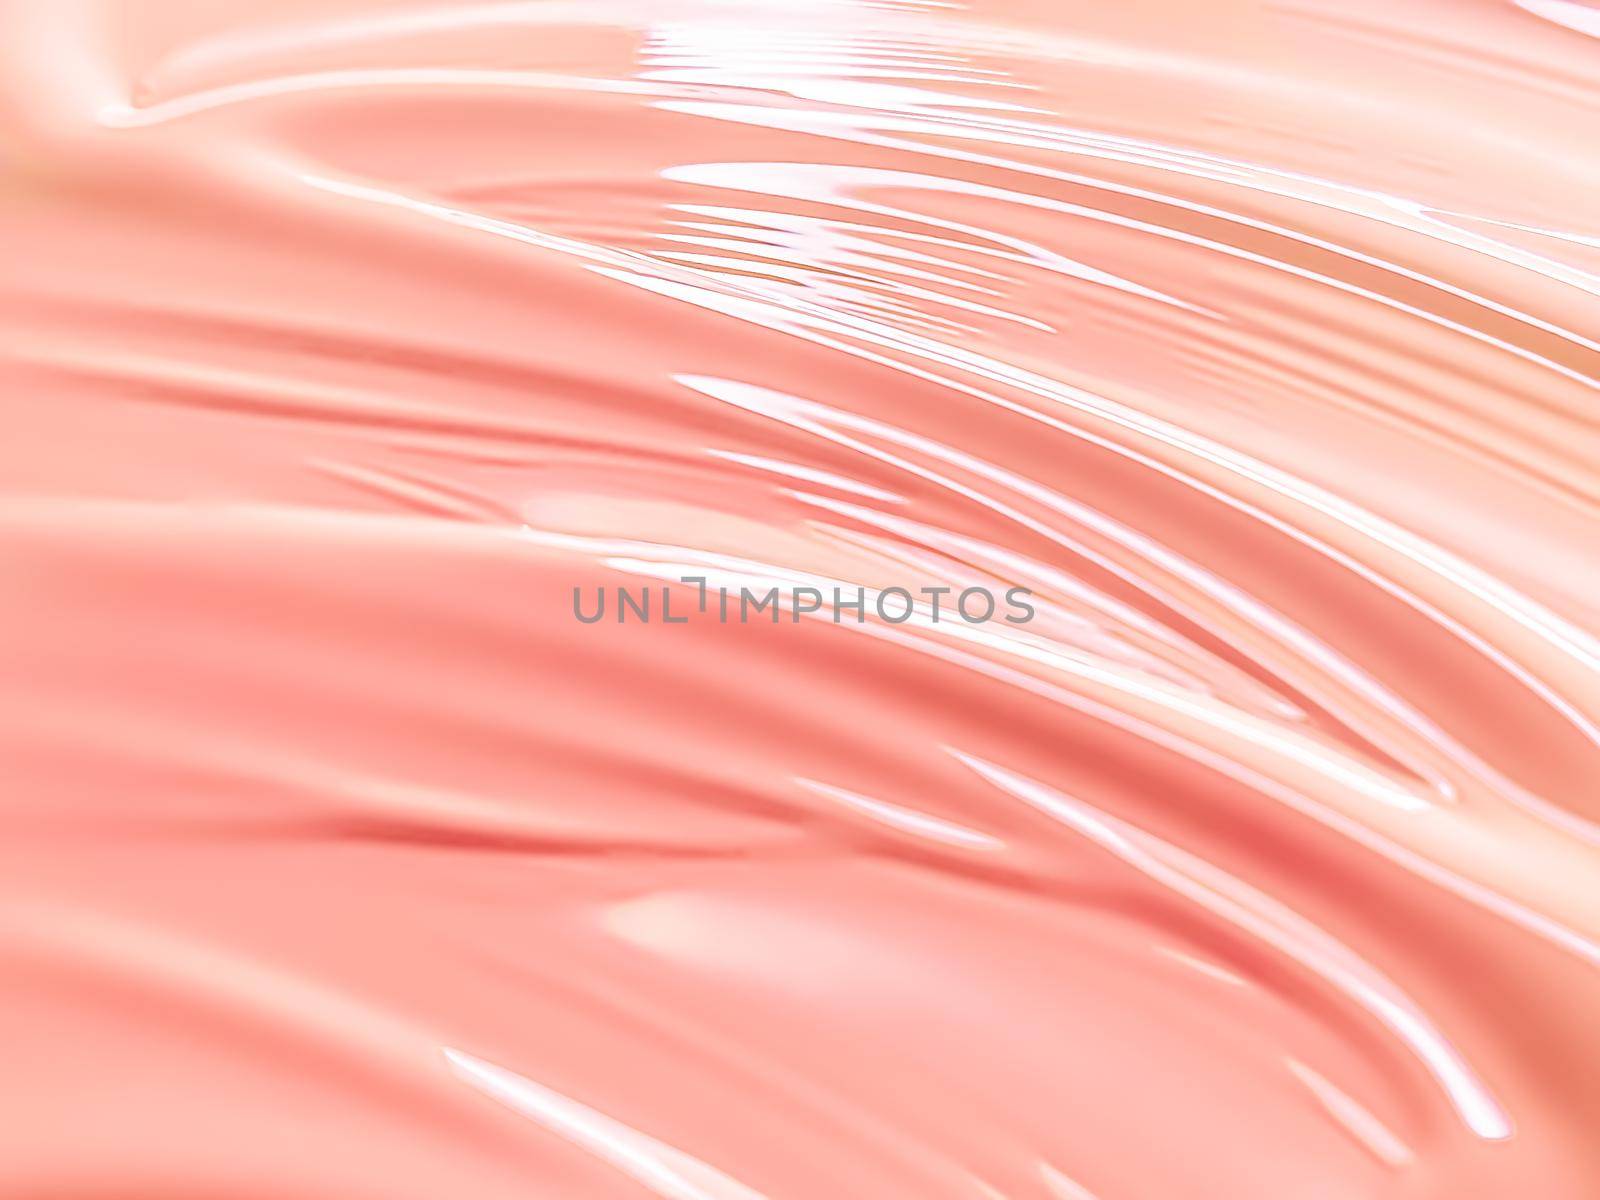 Glossy coral cosmetic texture as beauty make-up product background, skincare cosmetics and luxury makeup brand design by Anneleven